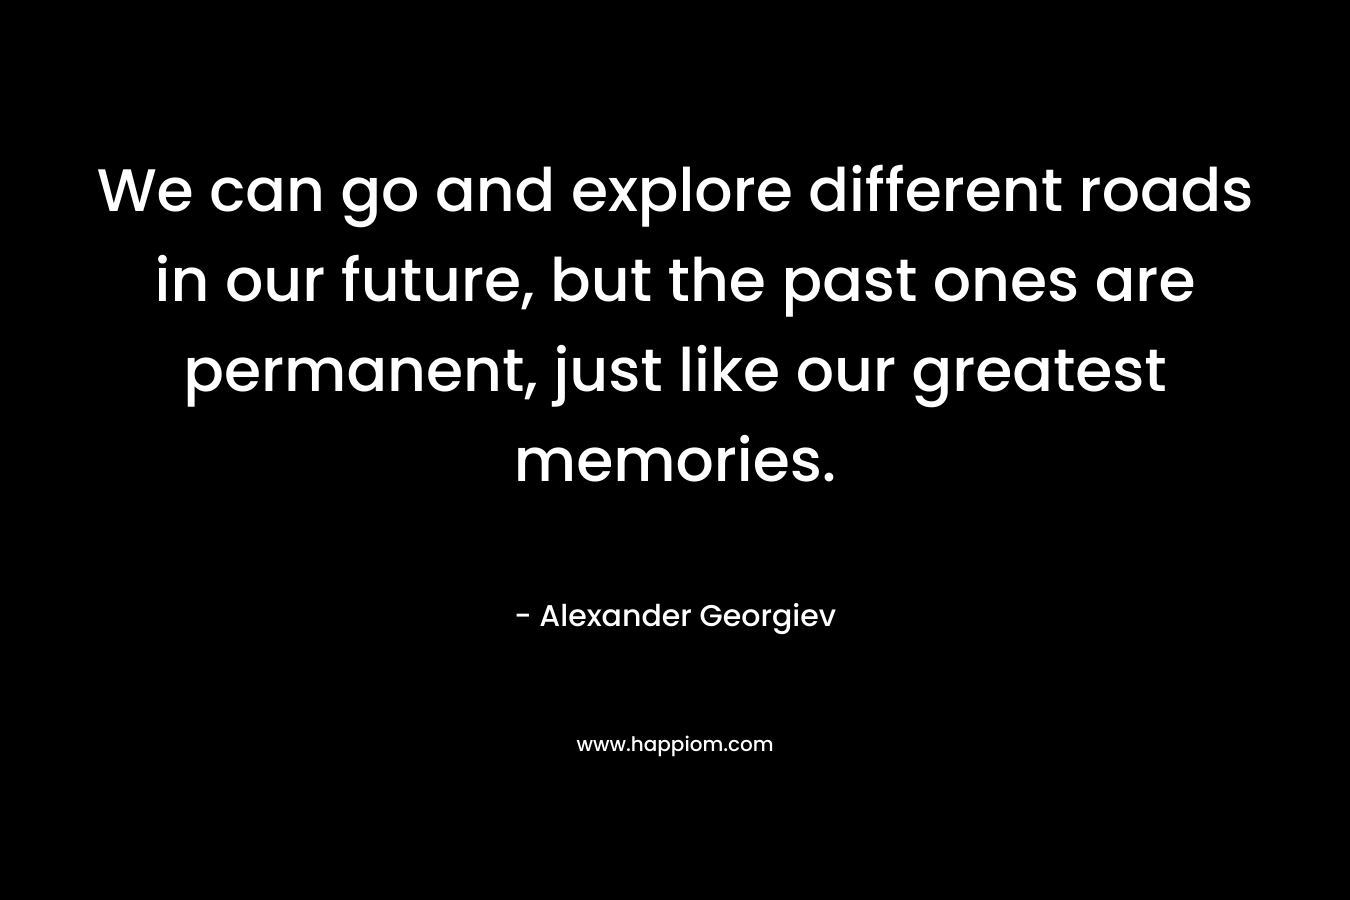 We can go and explore different roads in our future, but the past ones are permanent, just like our greatest memories.